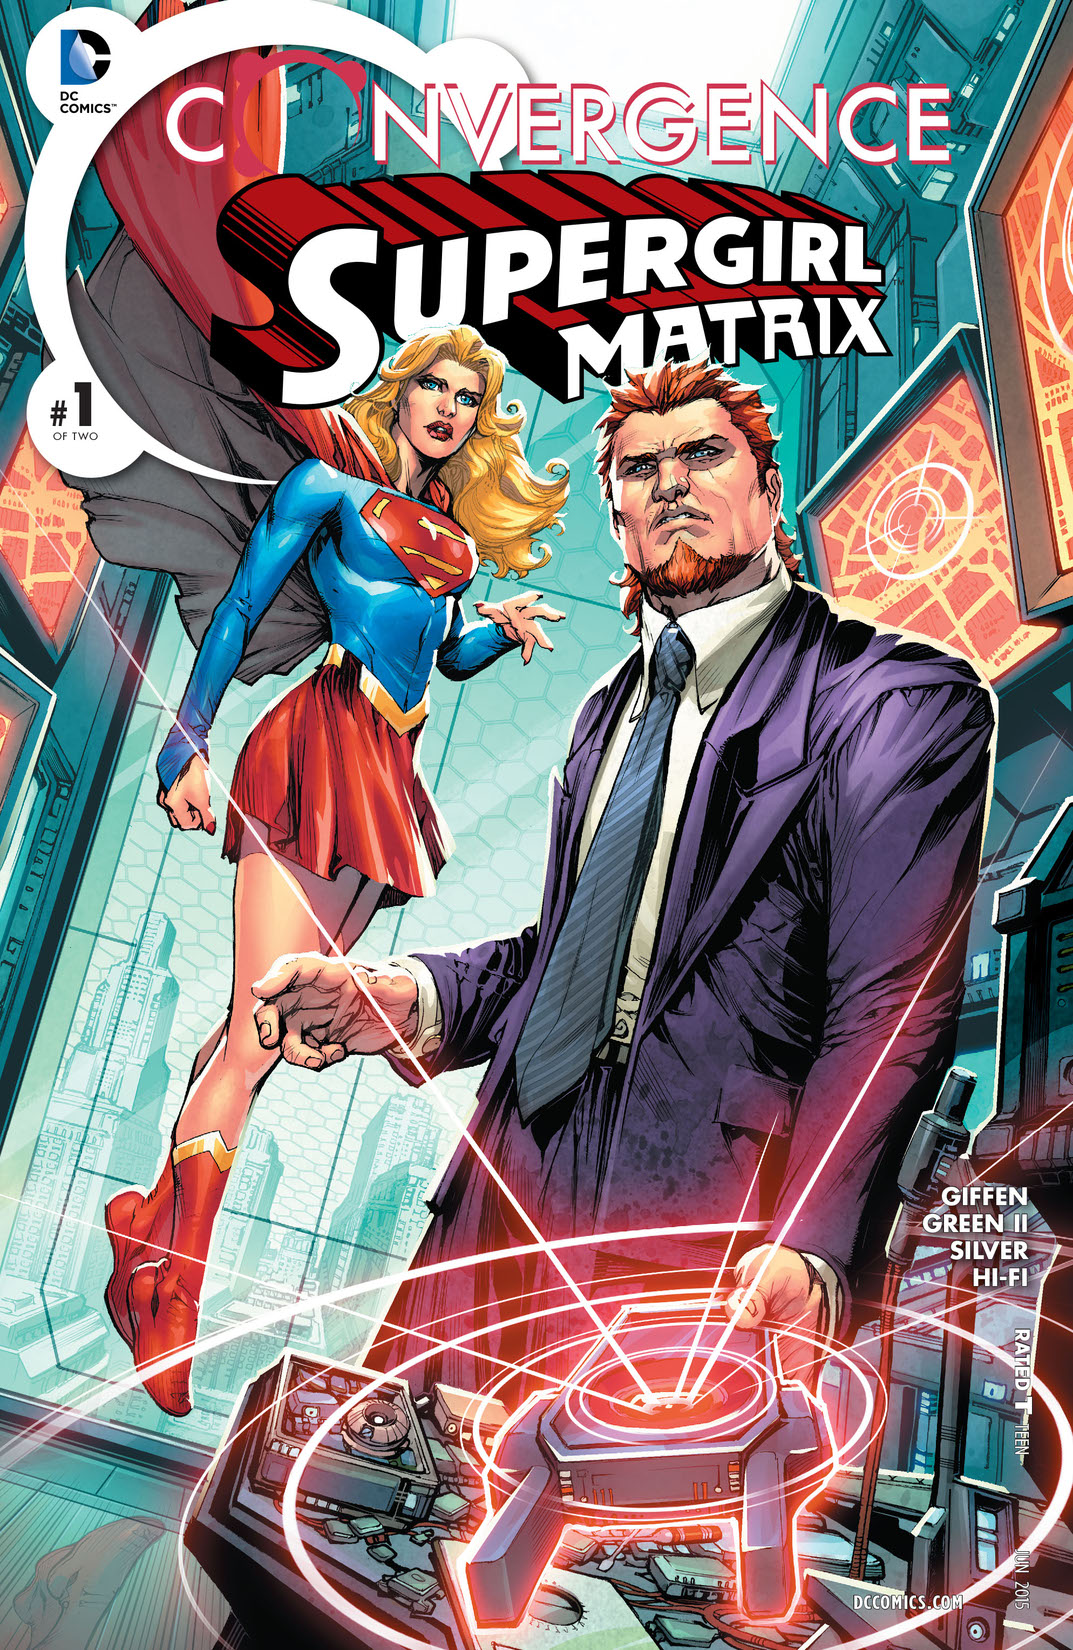 Convergence: Supergirl: Matrix #1 preview images